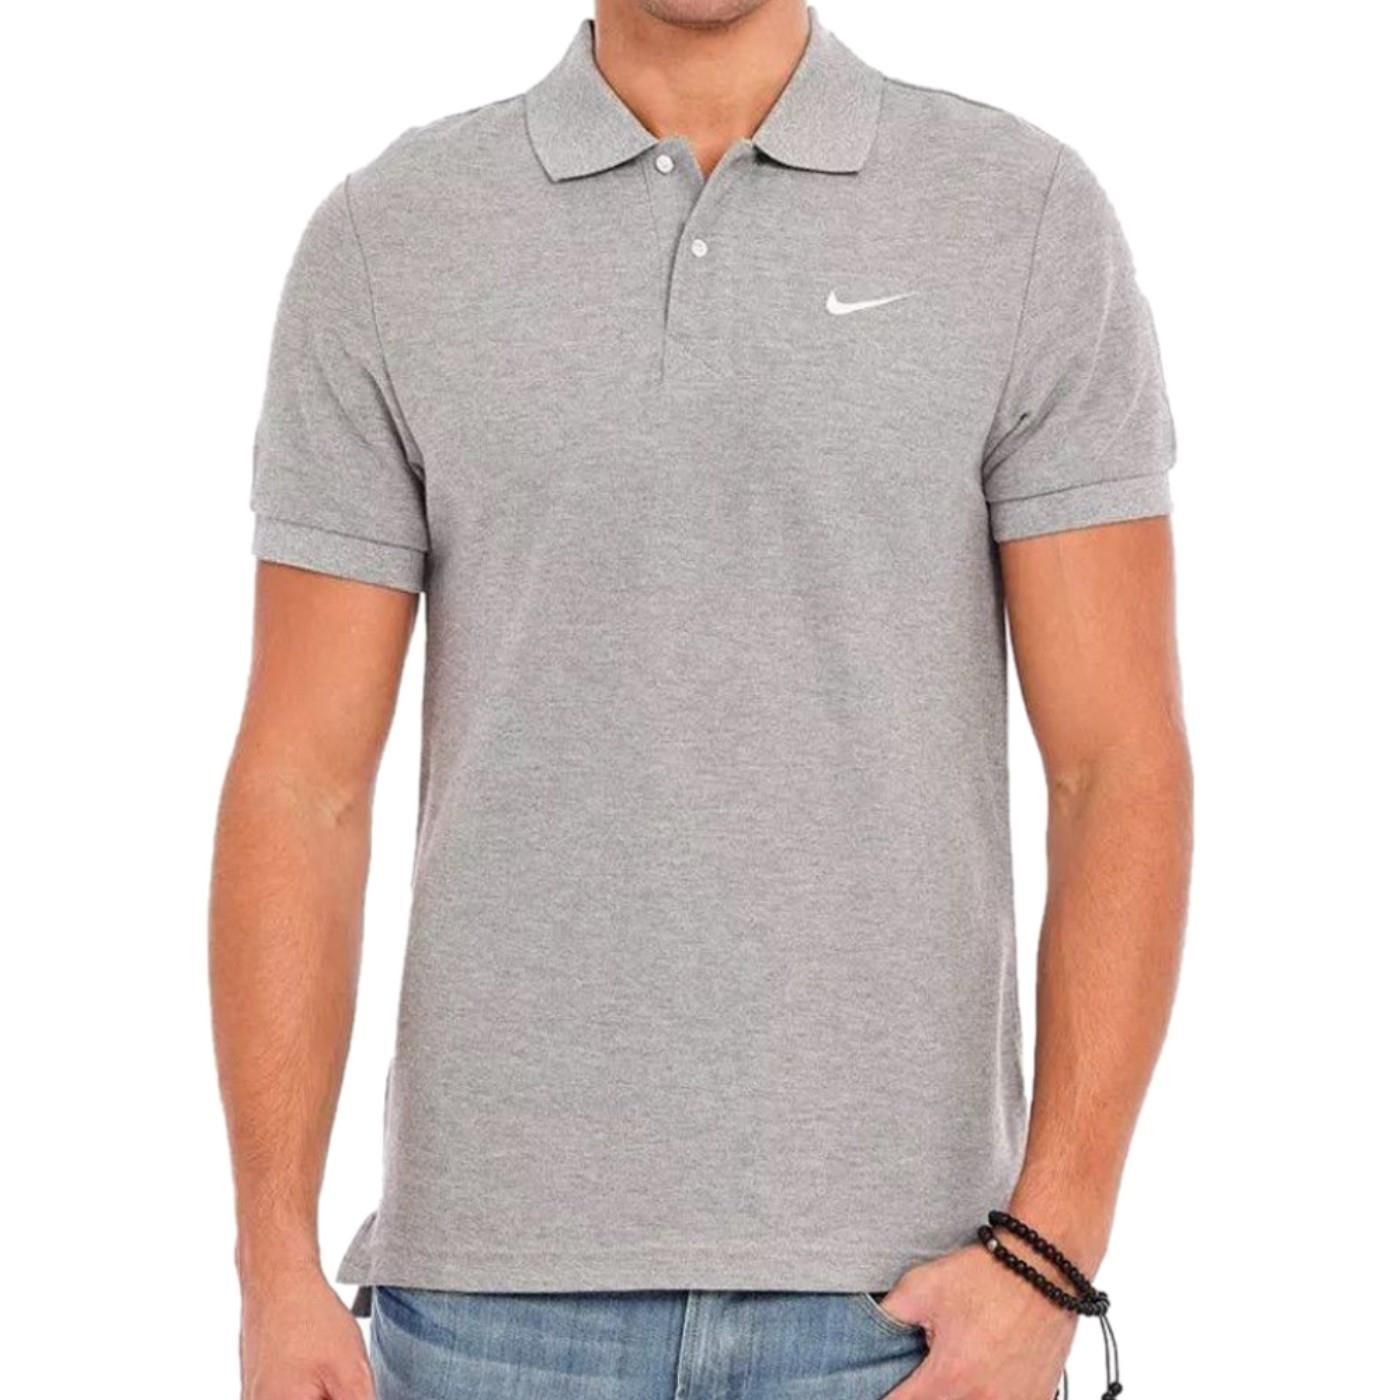 Nike Mens Classic Pique Polo Shirt.      
2 Button Placket, Ribbed Collar and Sleeves.      
Classic Swoosh on Breast.      
Available in Black Ang Grey Colours.      
Ideal for Casual Work Summer Office Wear.